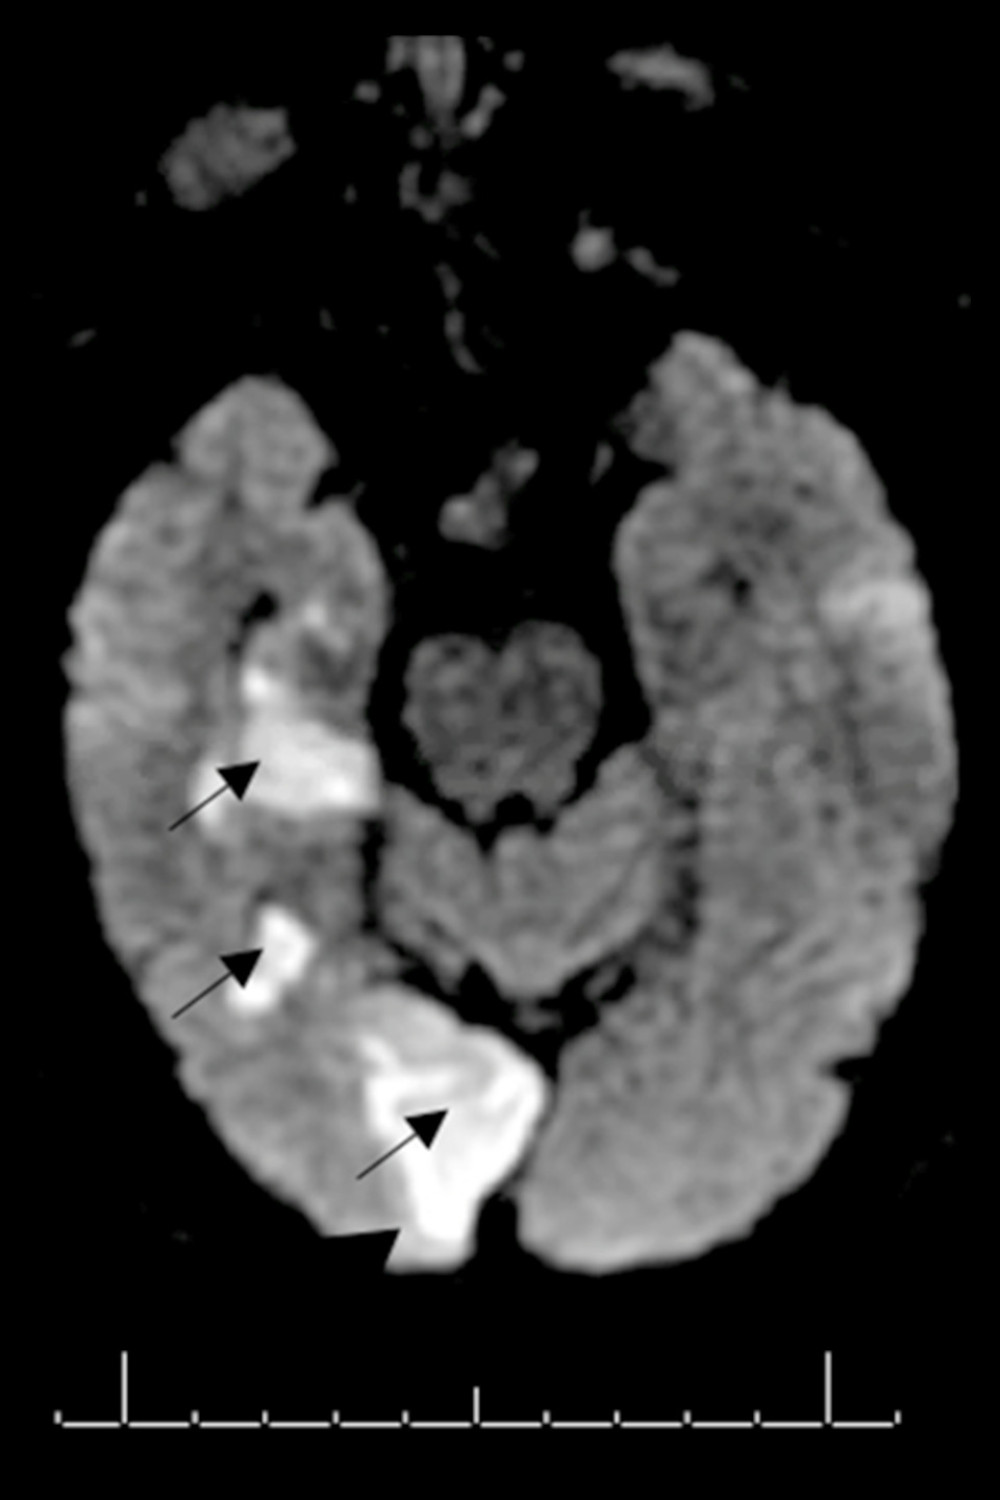 Axial diffusion-weighted MRI brain without contrast, with black arrows demonstrating acute-to-subacute right posterior cerebellar artery (PCA) territory infarction involving the posterior right temporal and right occipital lobes.